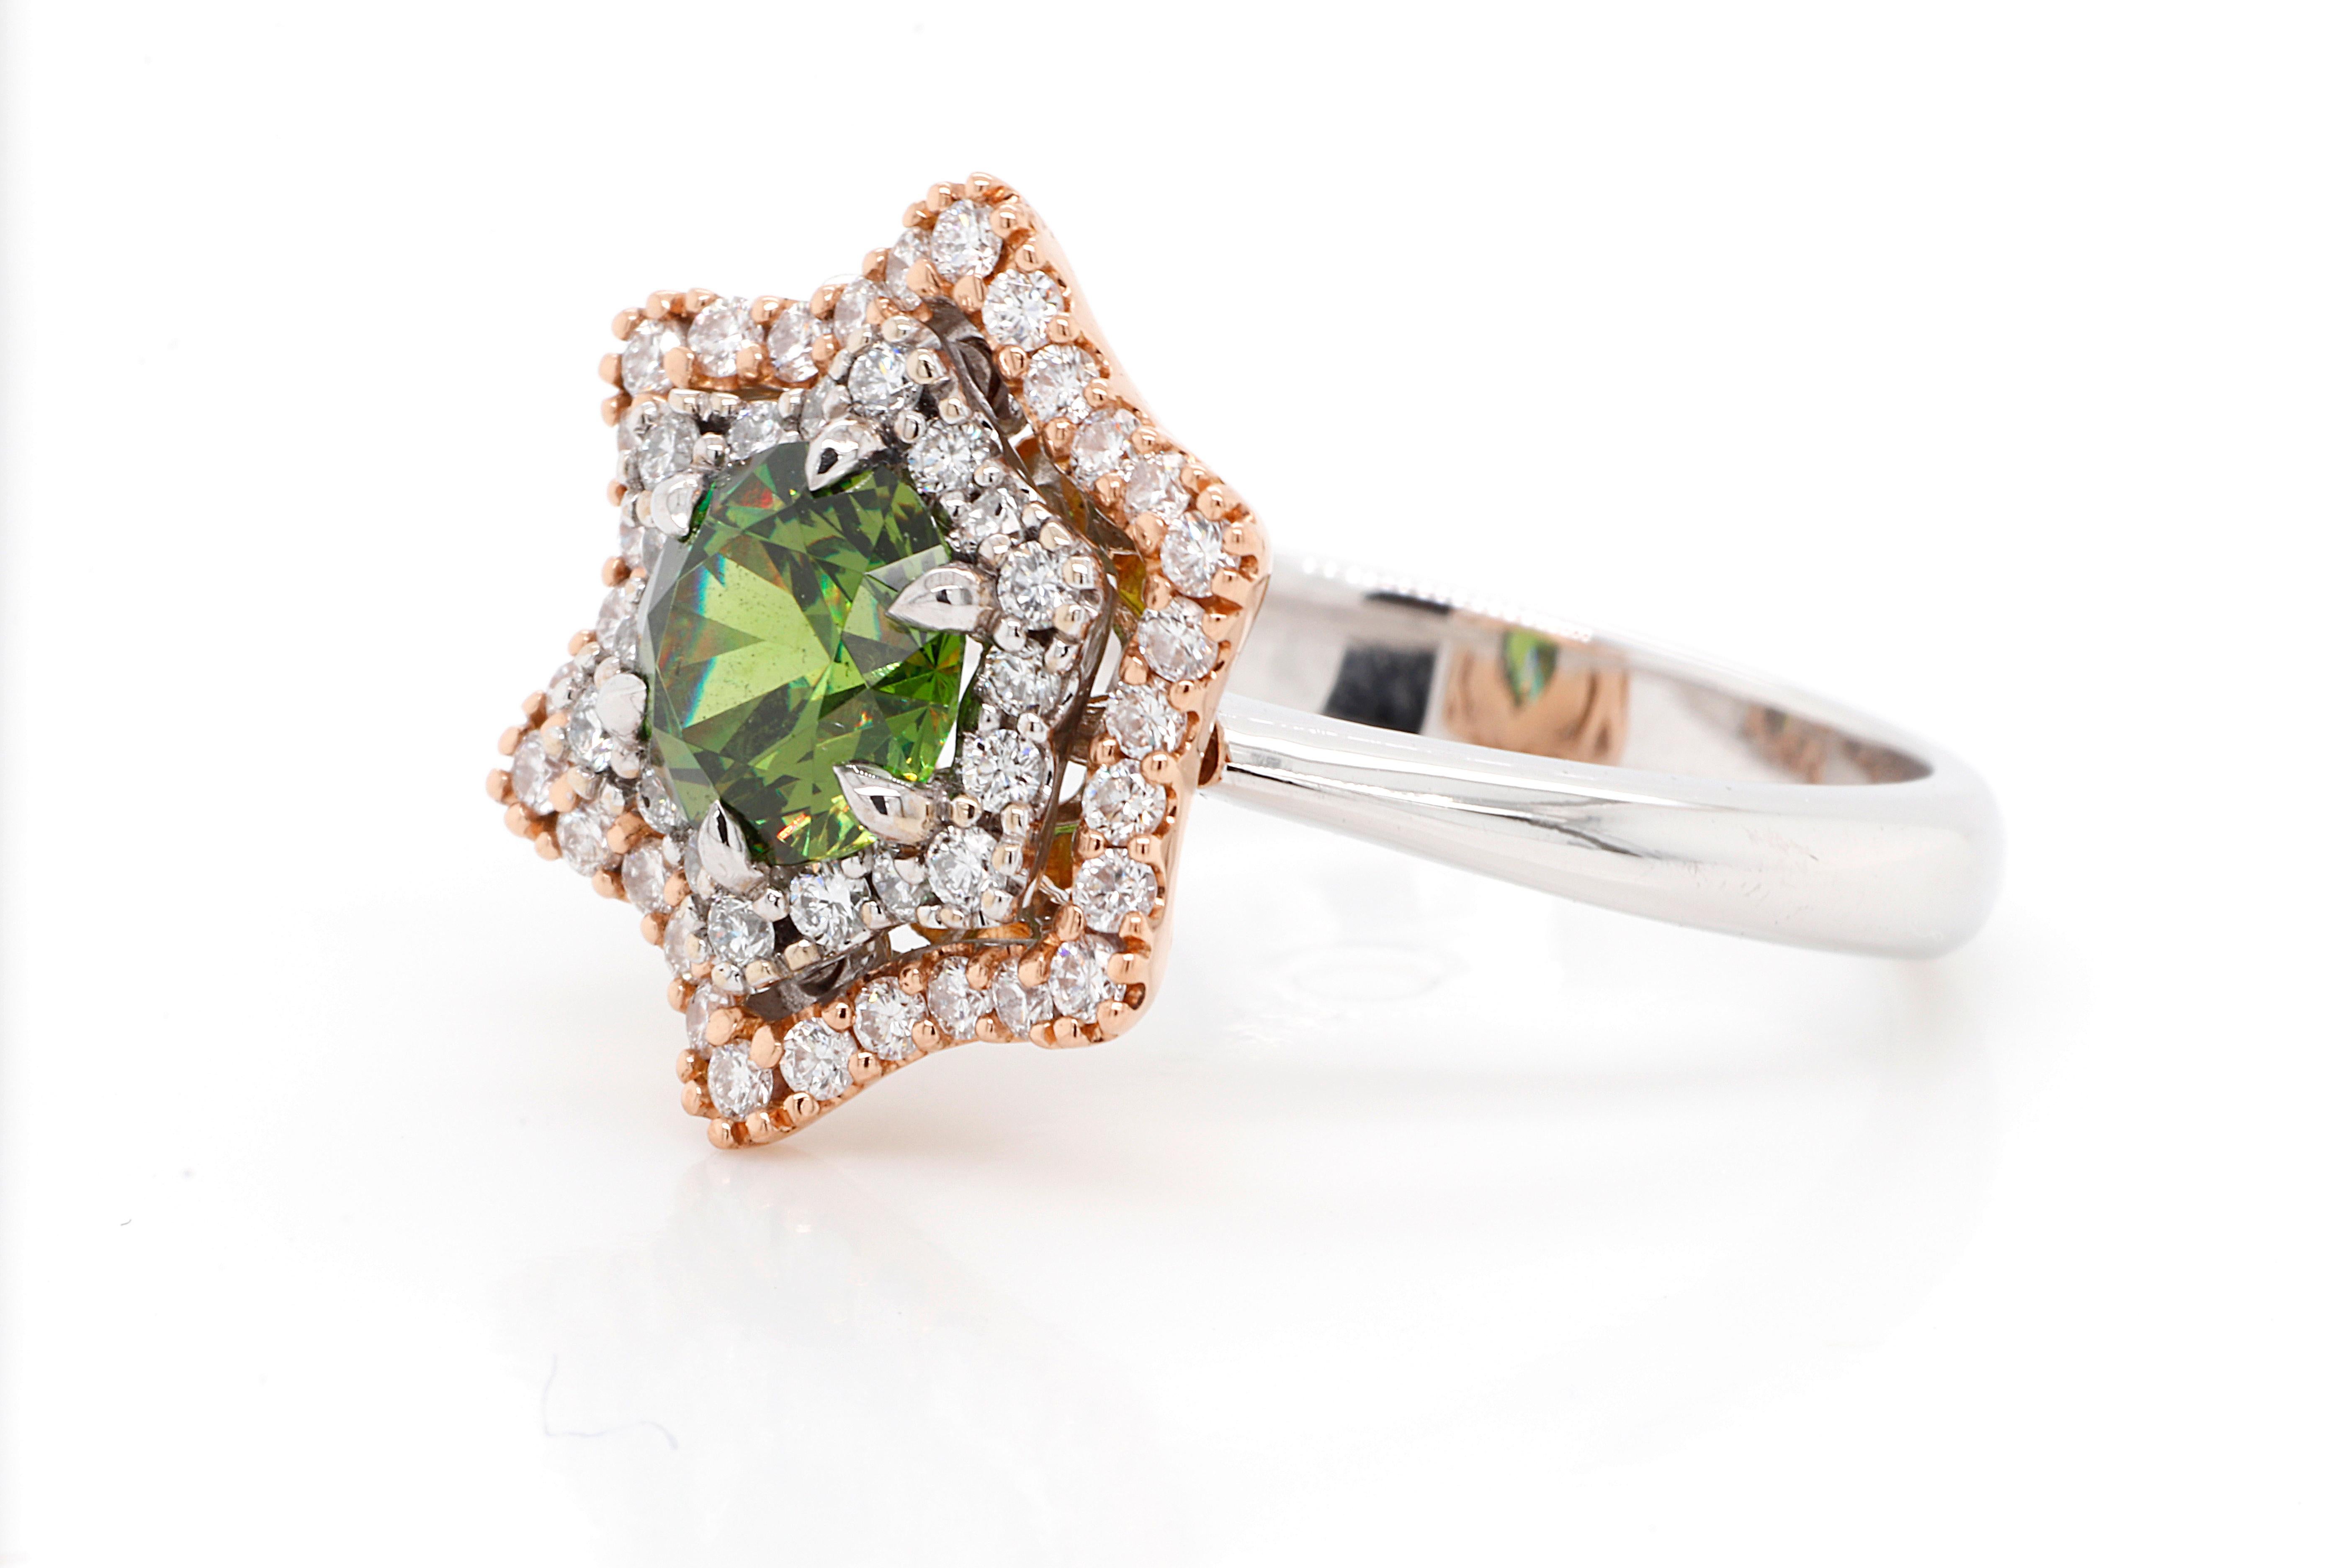 Sophisticated 18K White Gold Demantoid Ring with Diamonds. Featuring 1.19 ct of top quality Russian Demantoid combined with natural 0.43 ctw Diamonds G-H color and VVS1 clarity. 
Demantoid is called a star of garnets, it's name means diamond-like